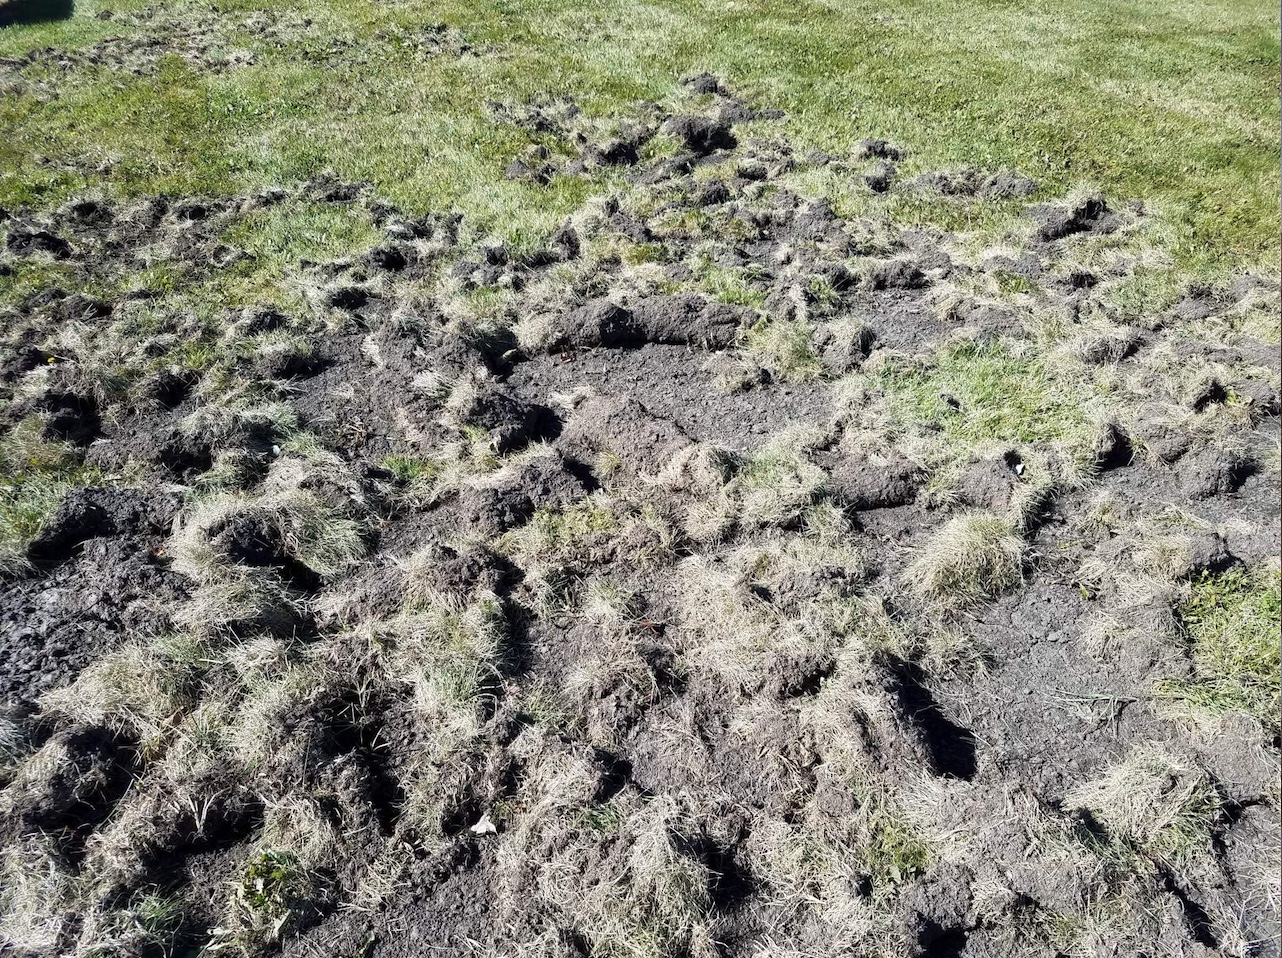 This lawn was destroyed by raccoons foraging in the yard.